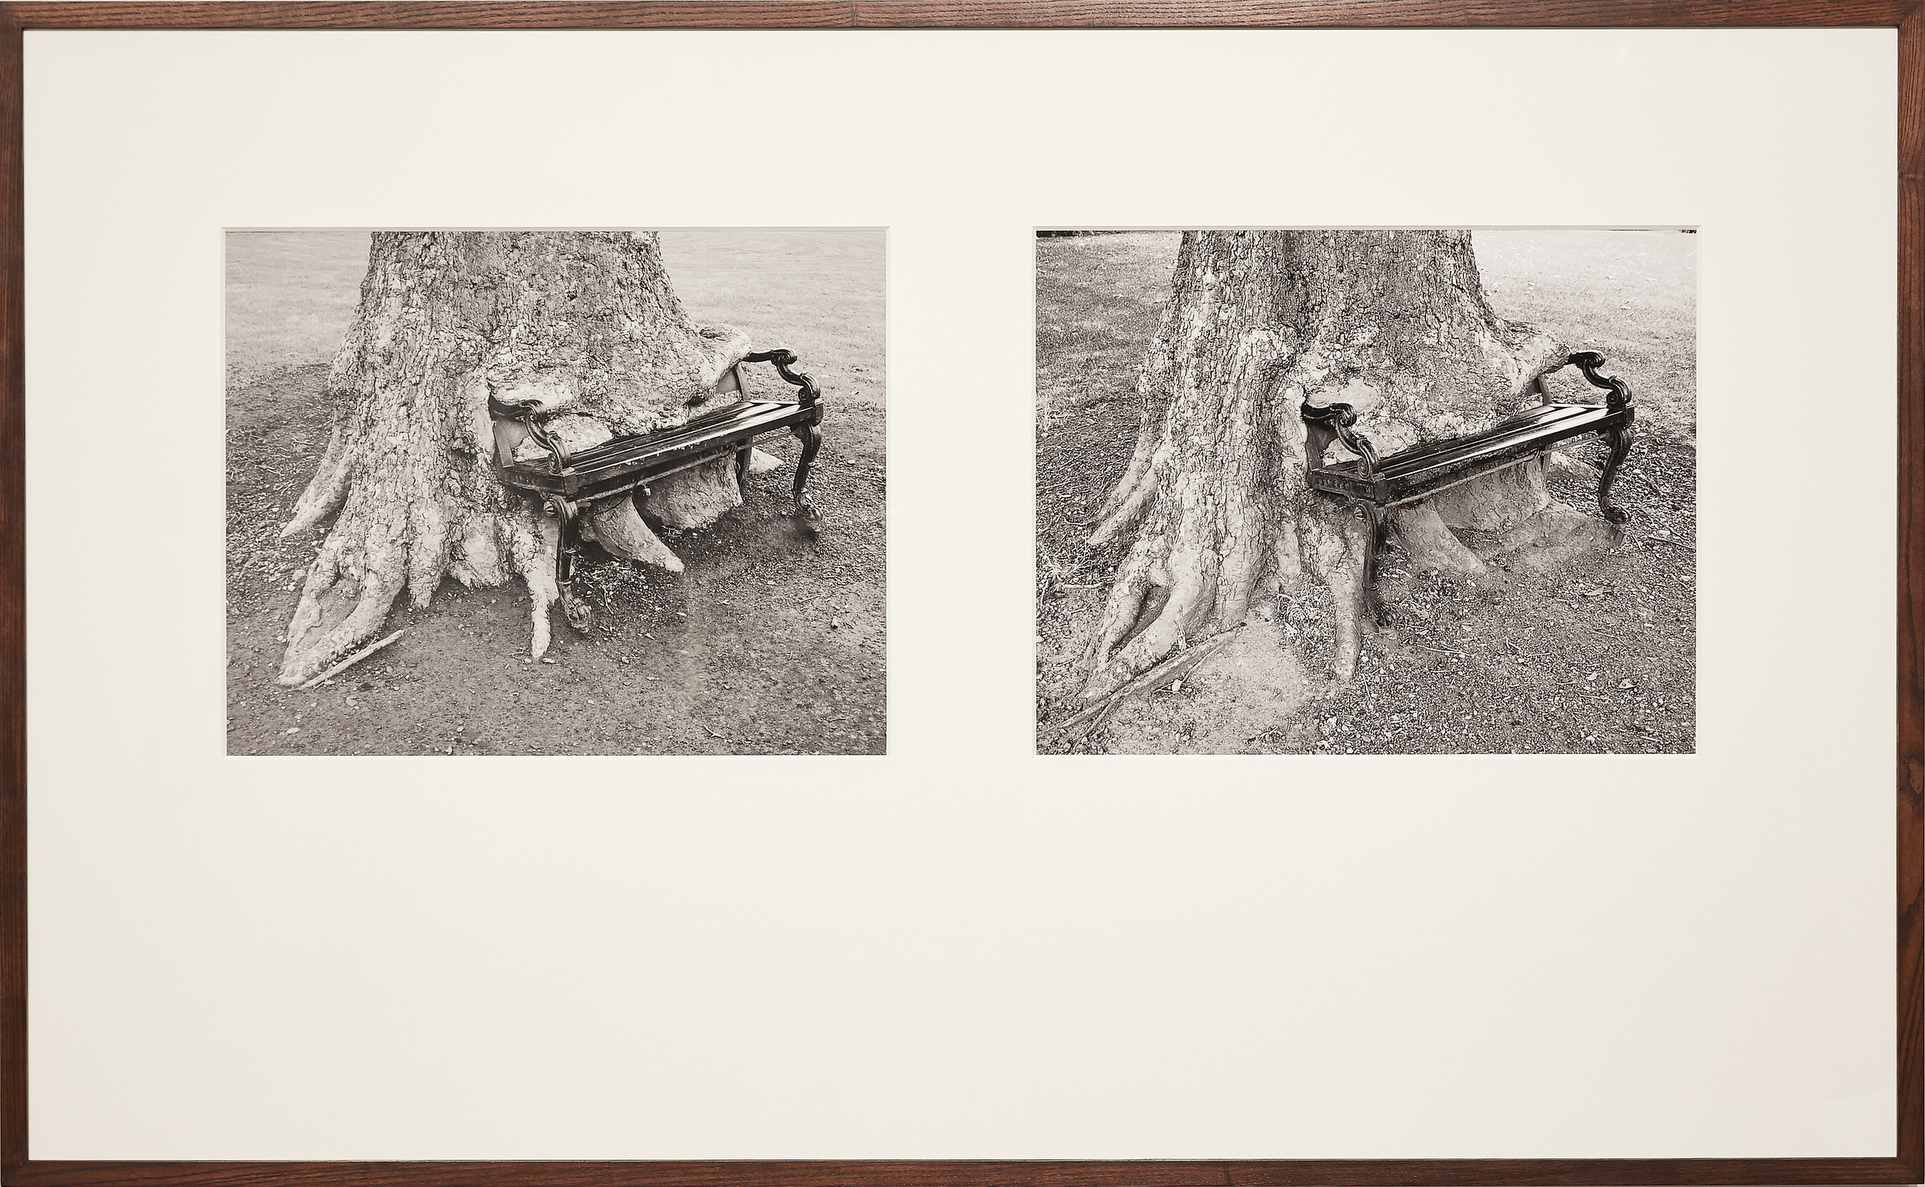 Sean Lynch, The Hungry Tree, 2017, 2 photographic prints in one frame, 98×143 cm